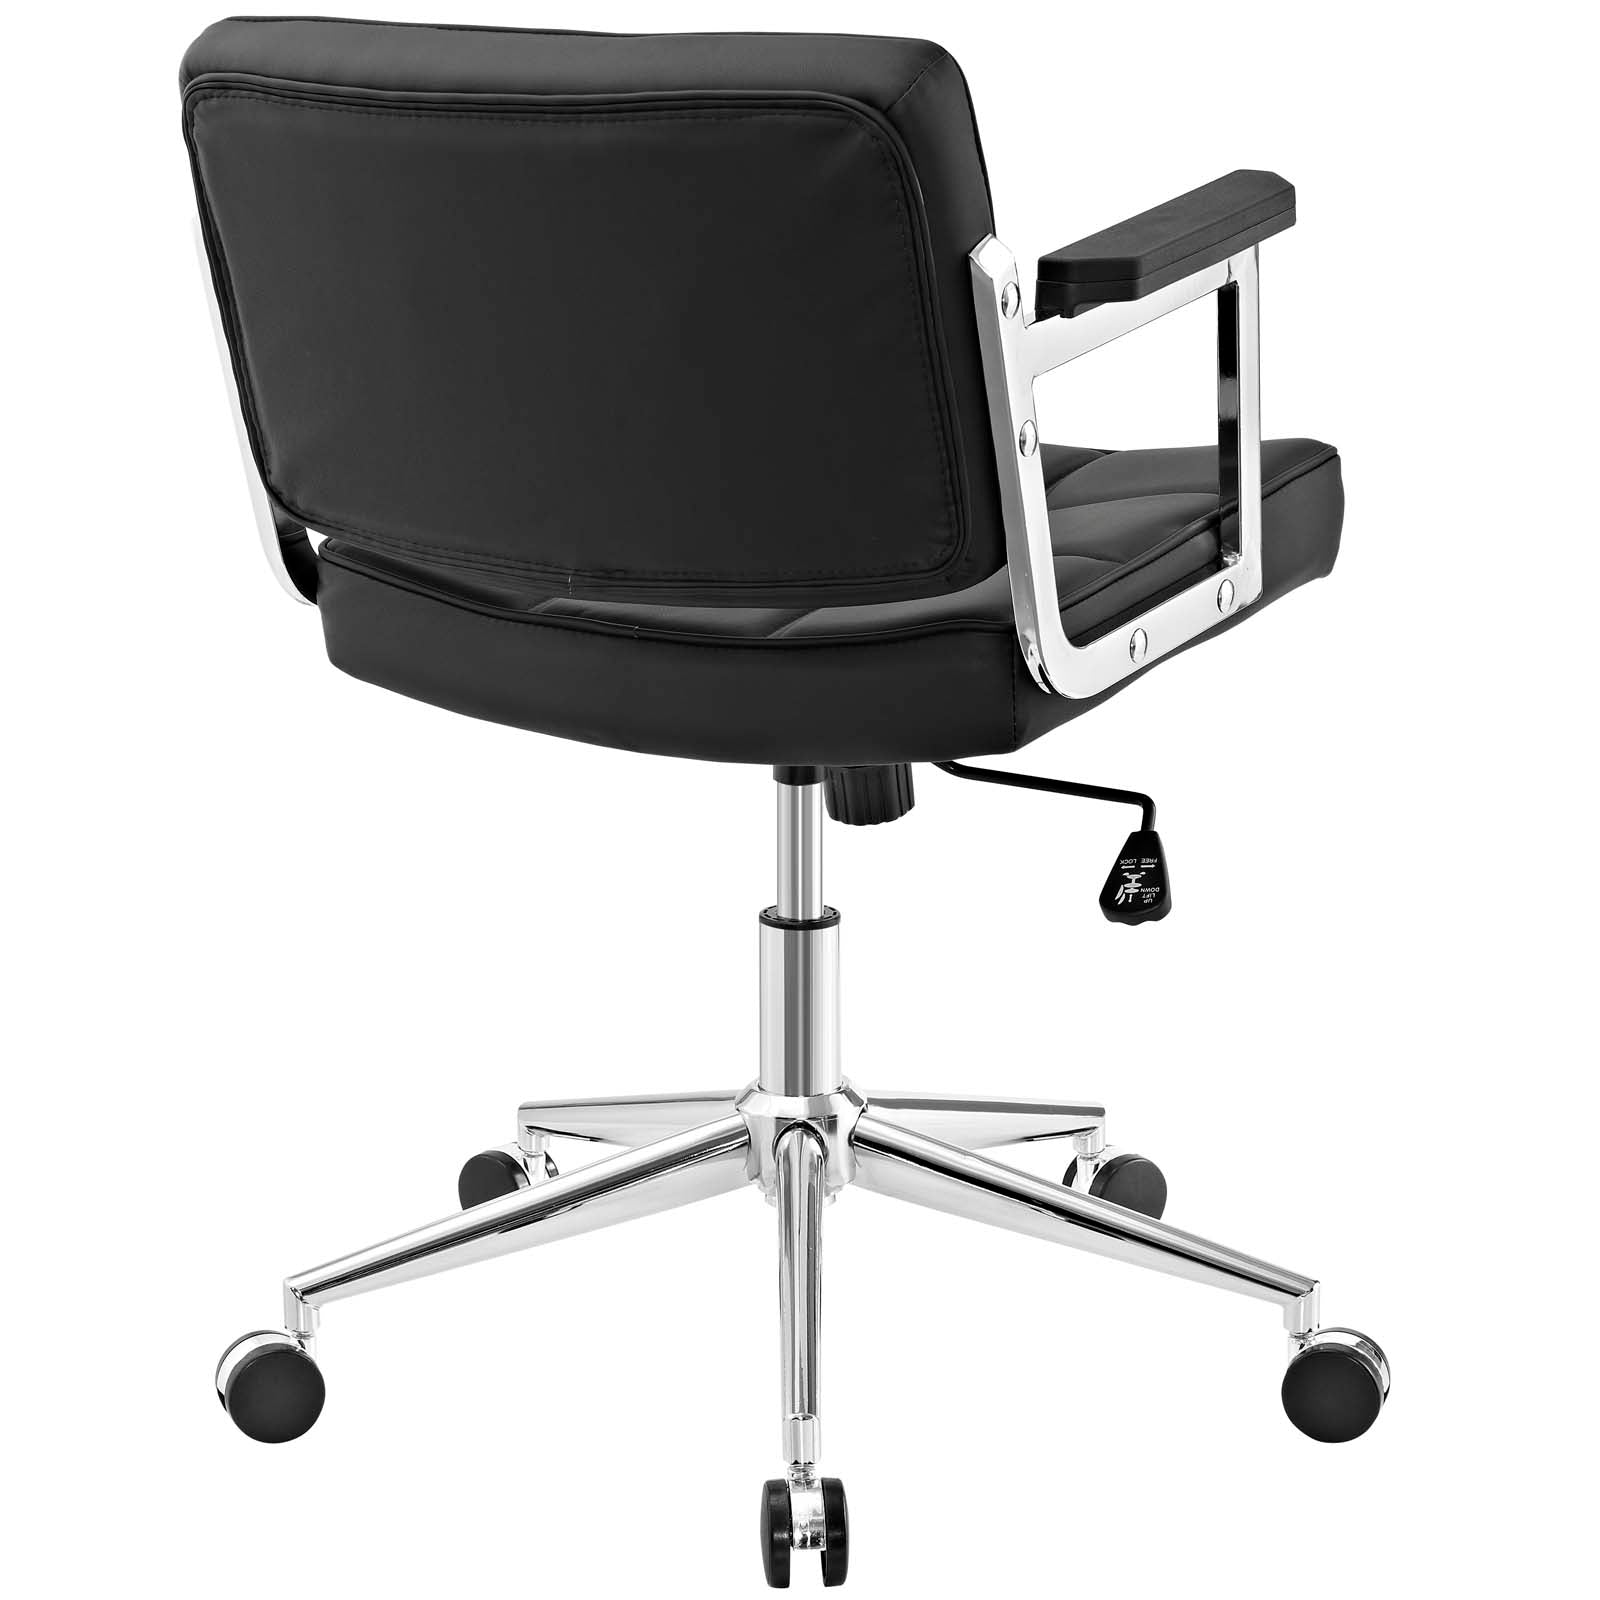 Modway Task Chairs - Portray Mid Back Upholstered Vinyl Office Chair Black